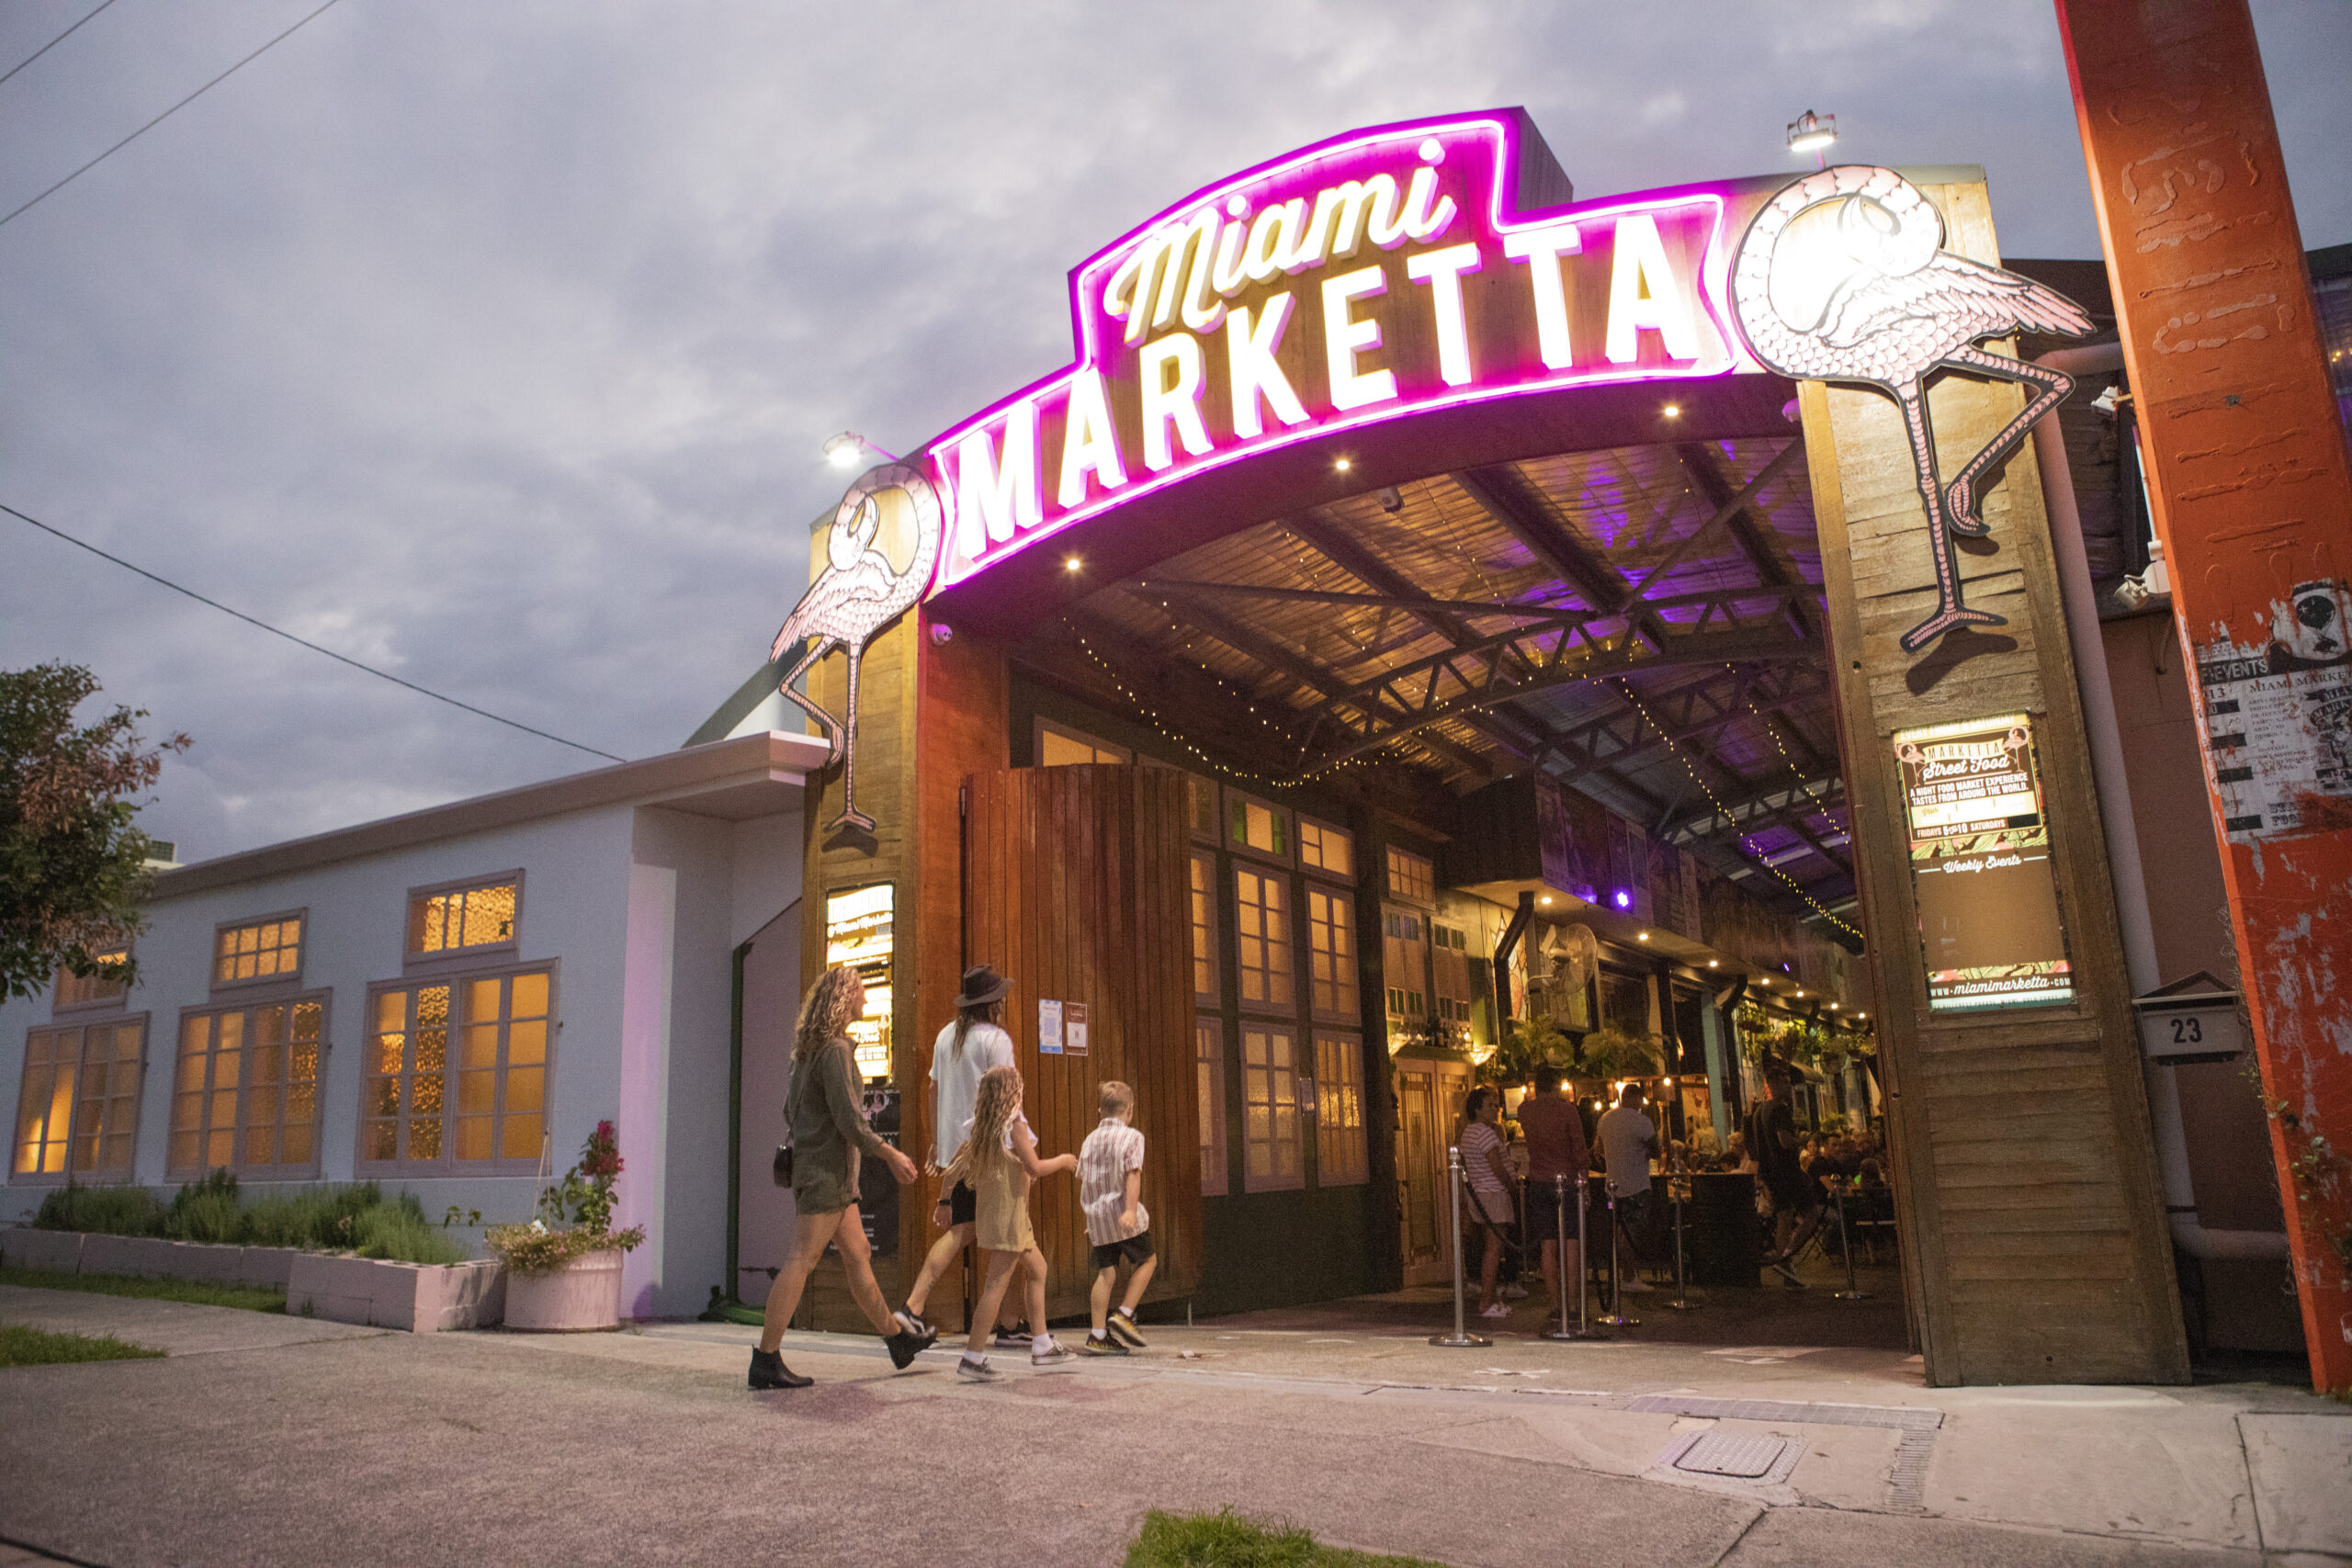 Miami Marketta on the Gold Coast (Photo Credit: Tourism and Events Queensland)